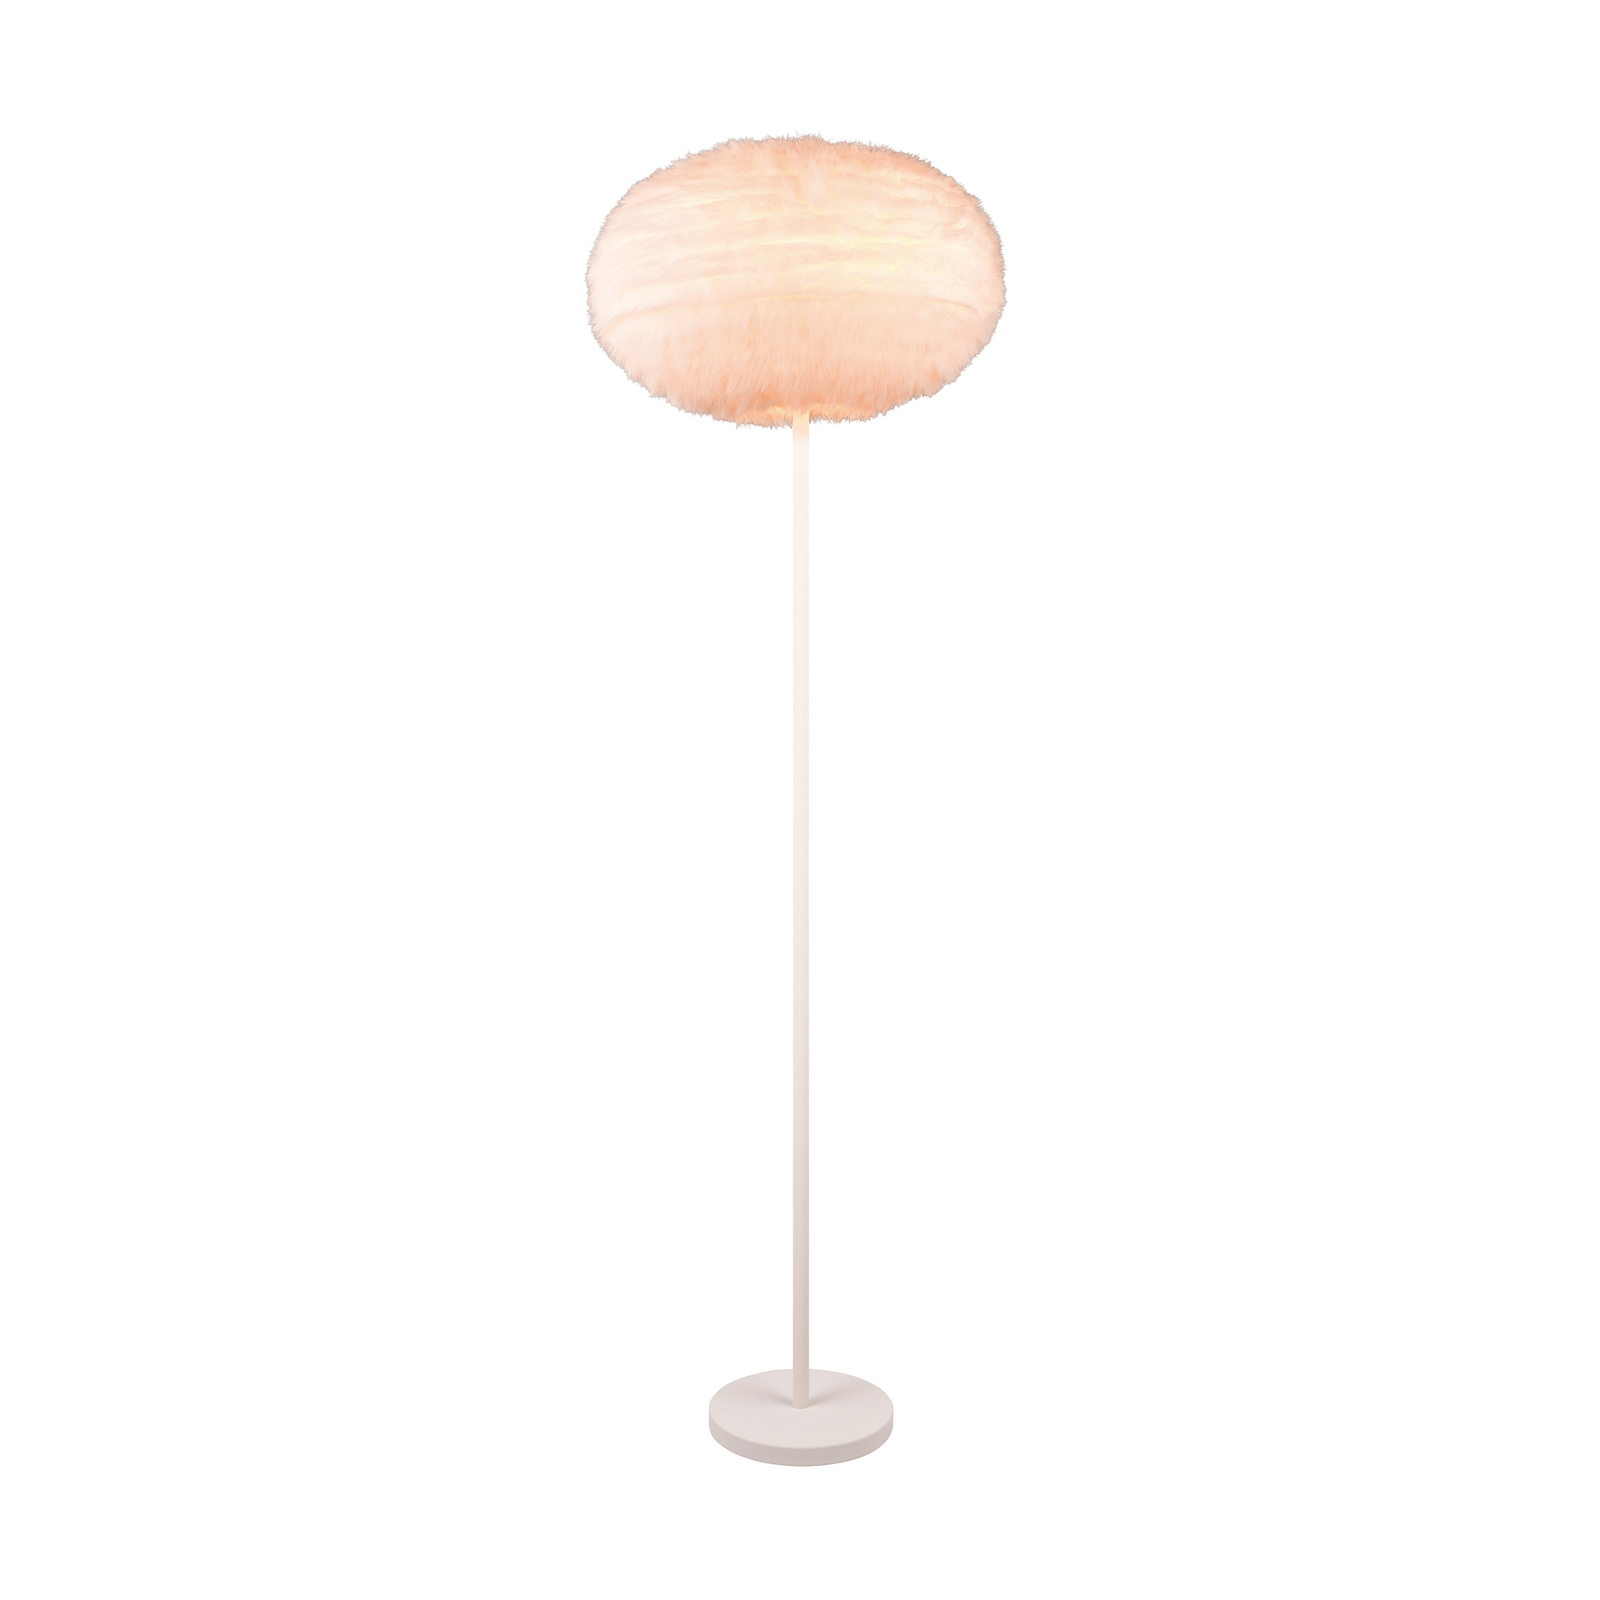 Furry floor lamp, height 154 cm, sand-coloured, synthetic plush